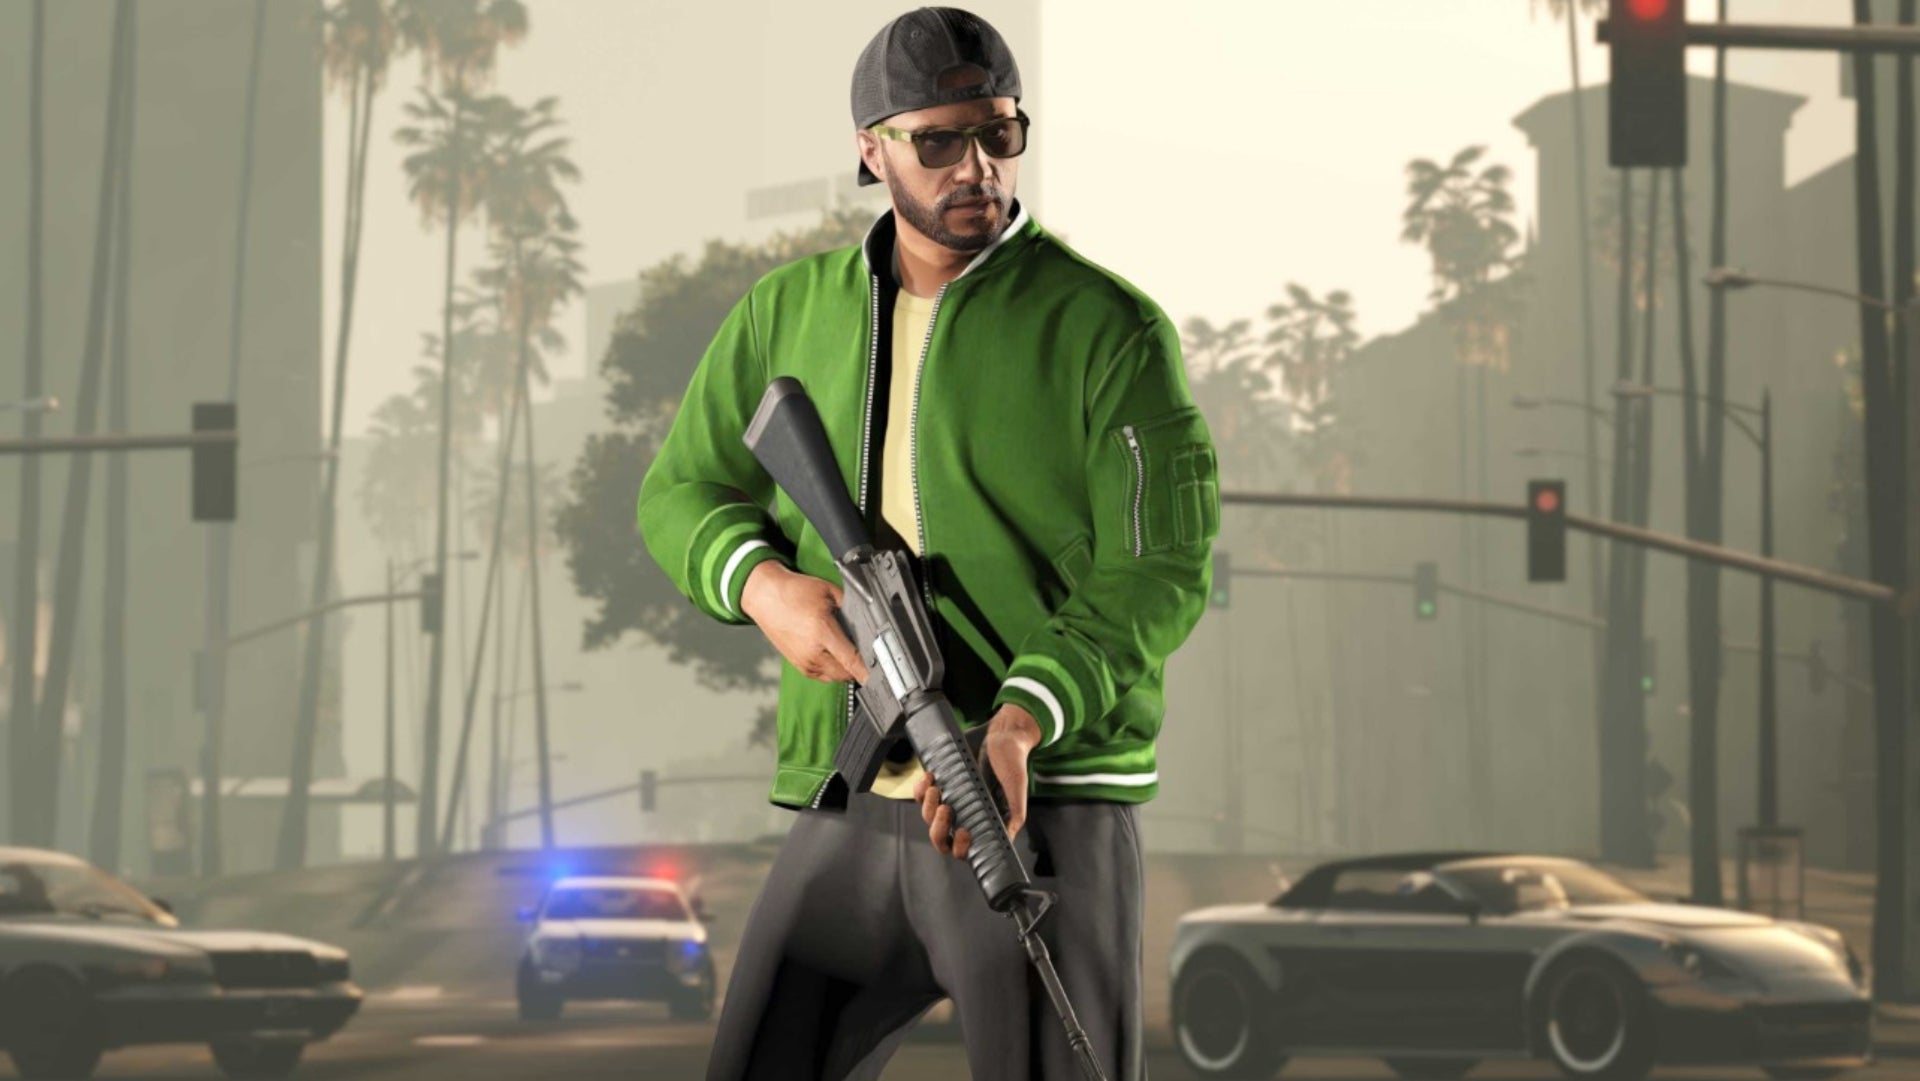 GTA Online official Rockstar newswire image of a character in a green jacket holding the new Service Carbine